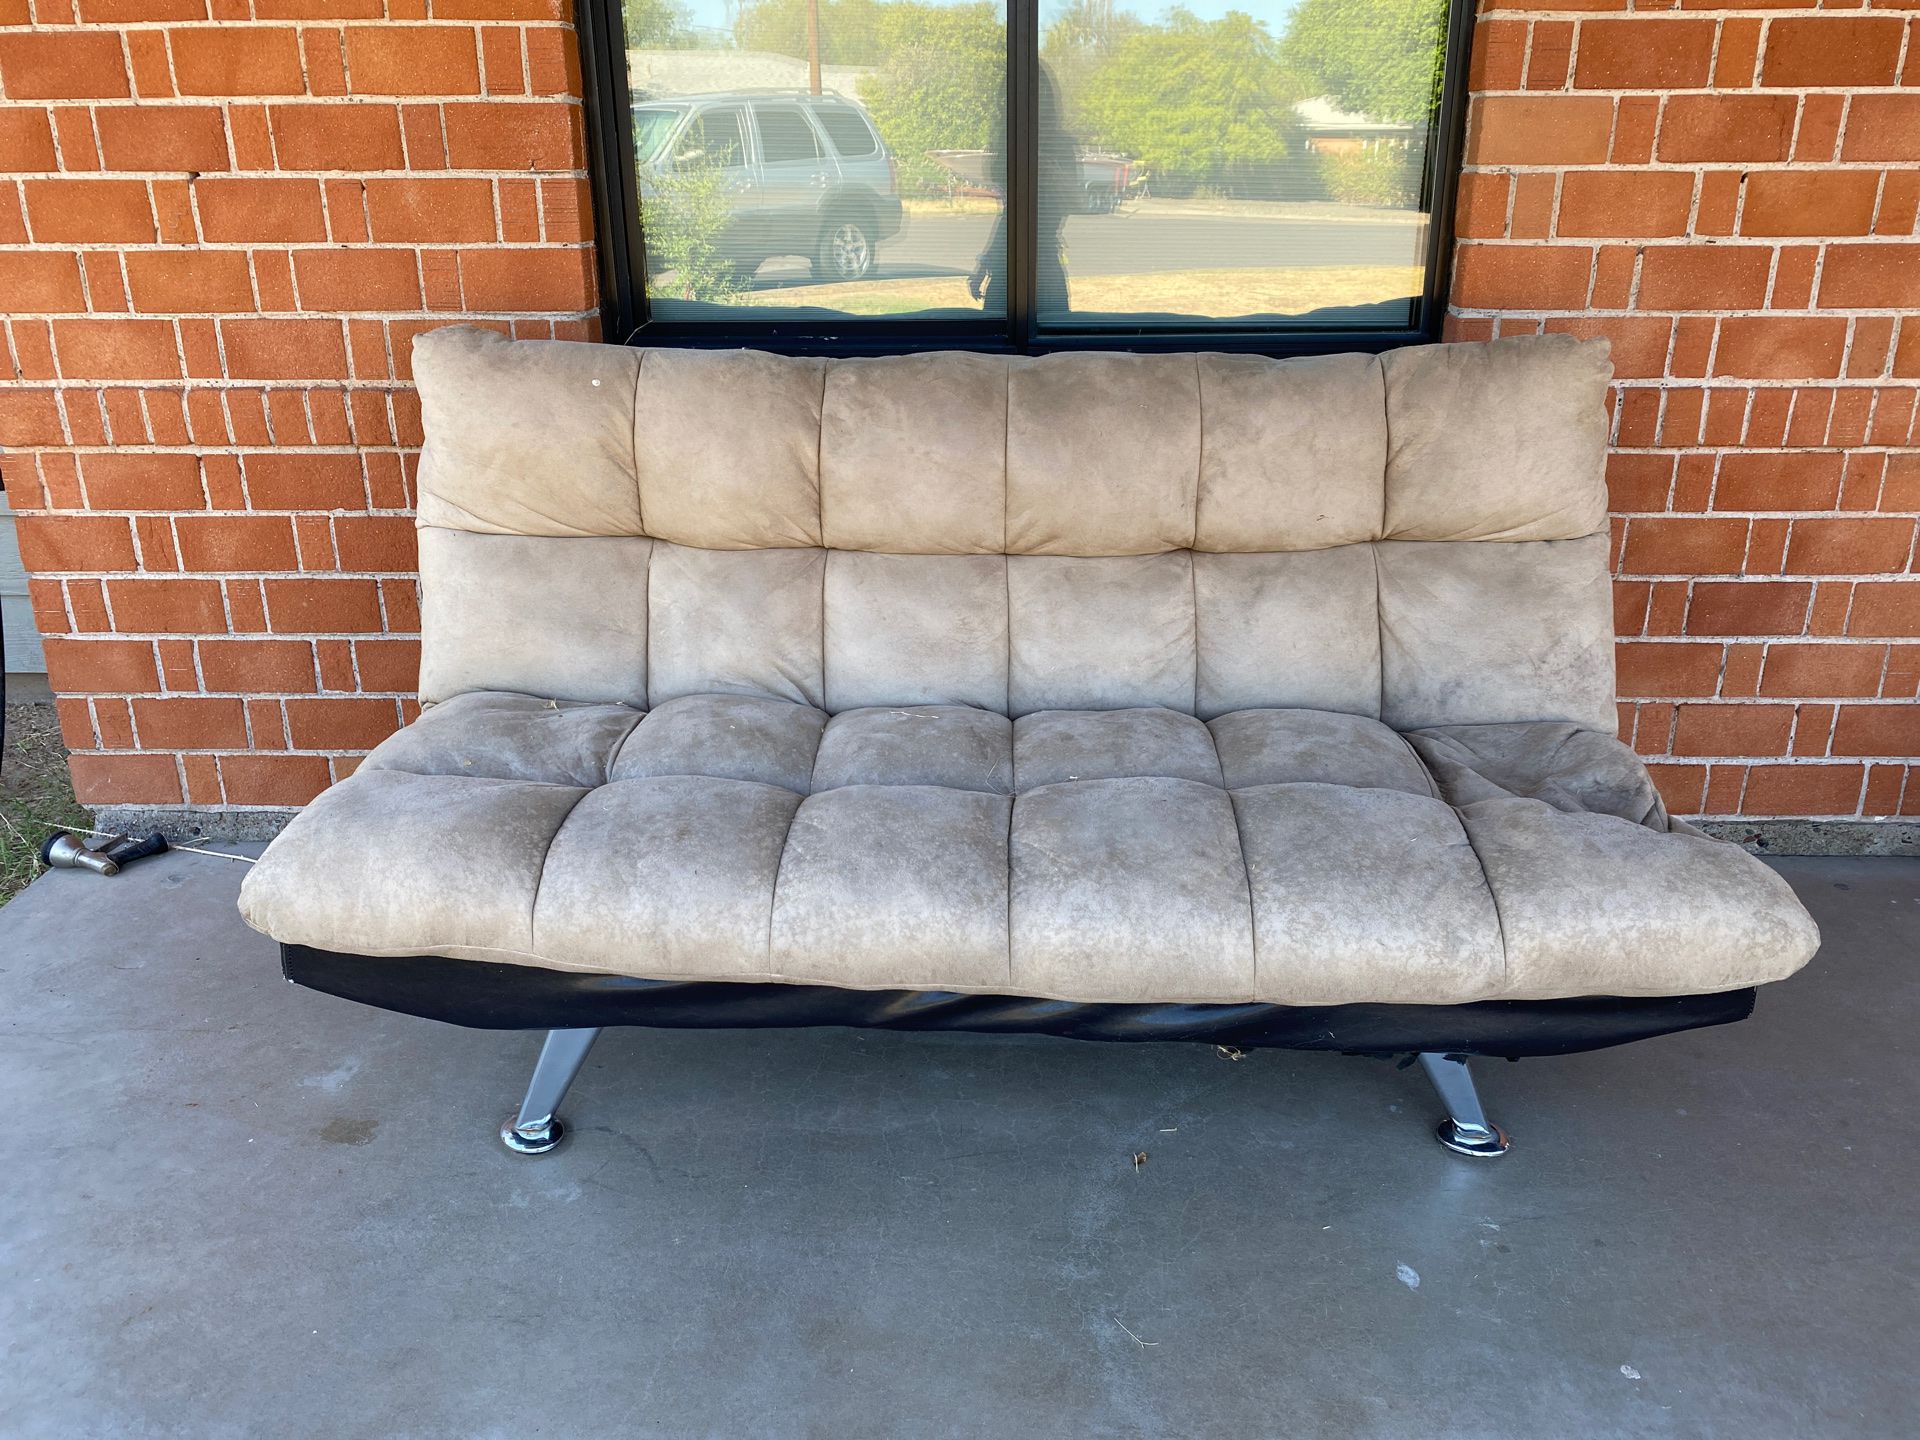 Used Futon, couch and bed